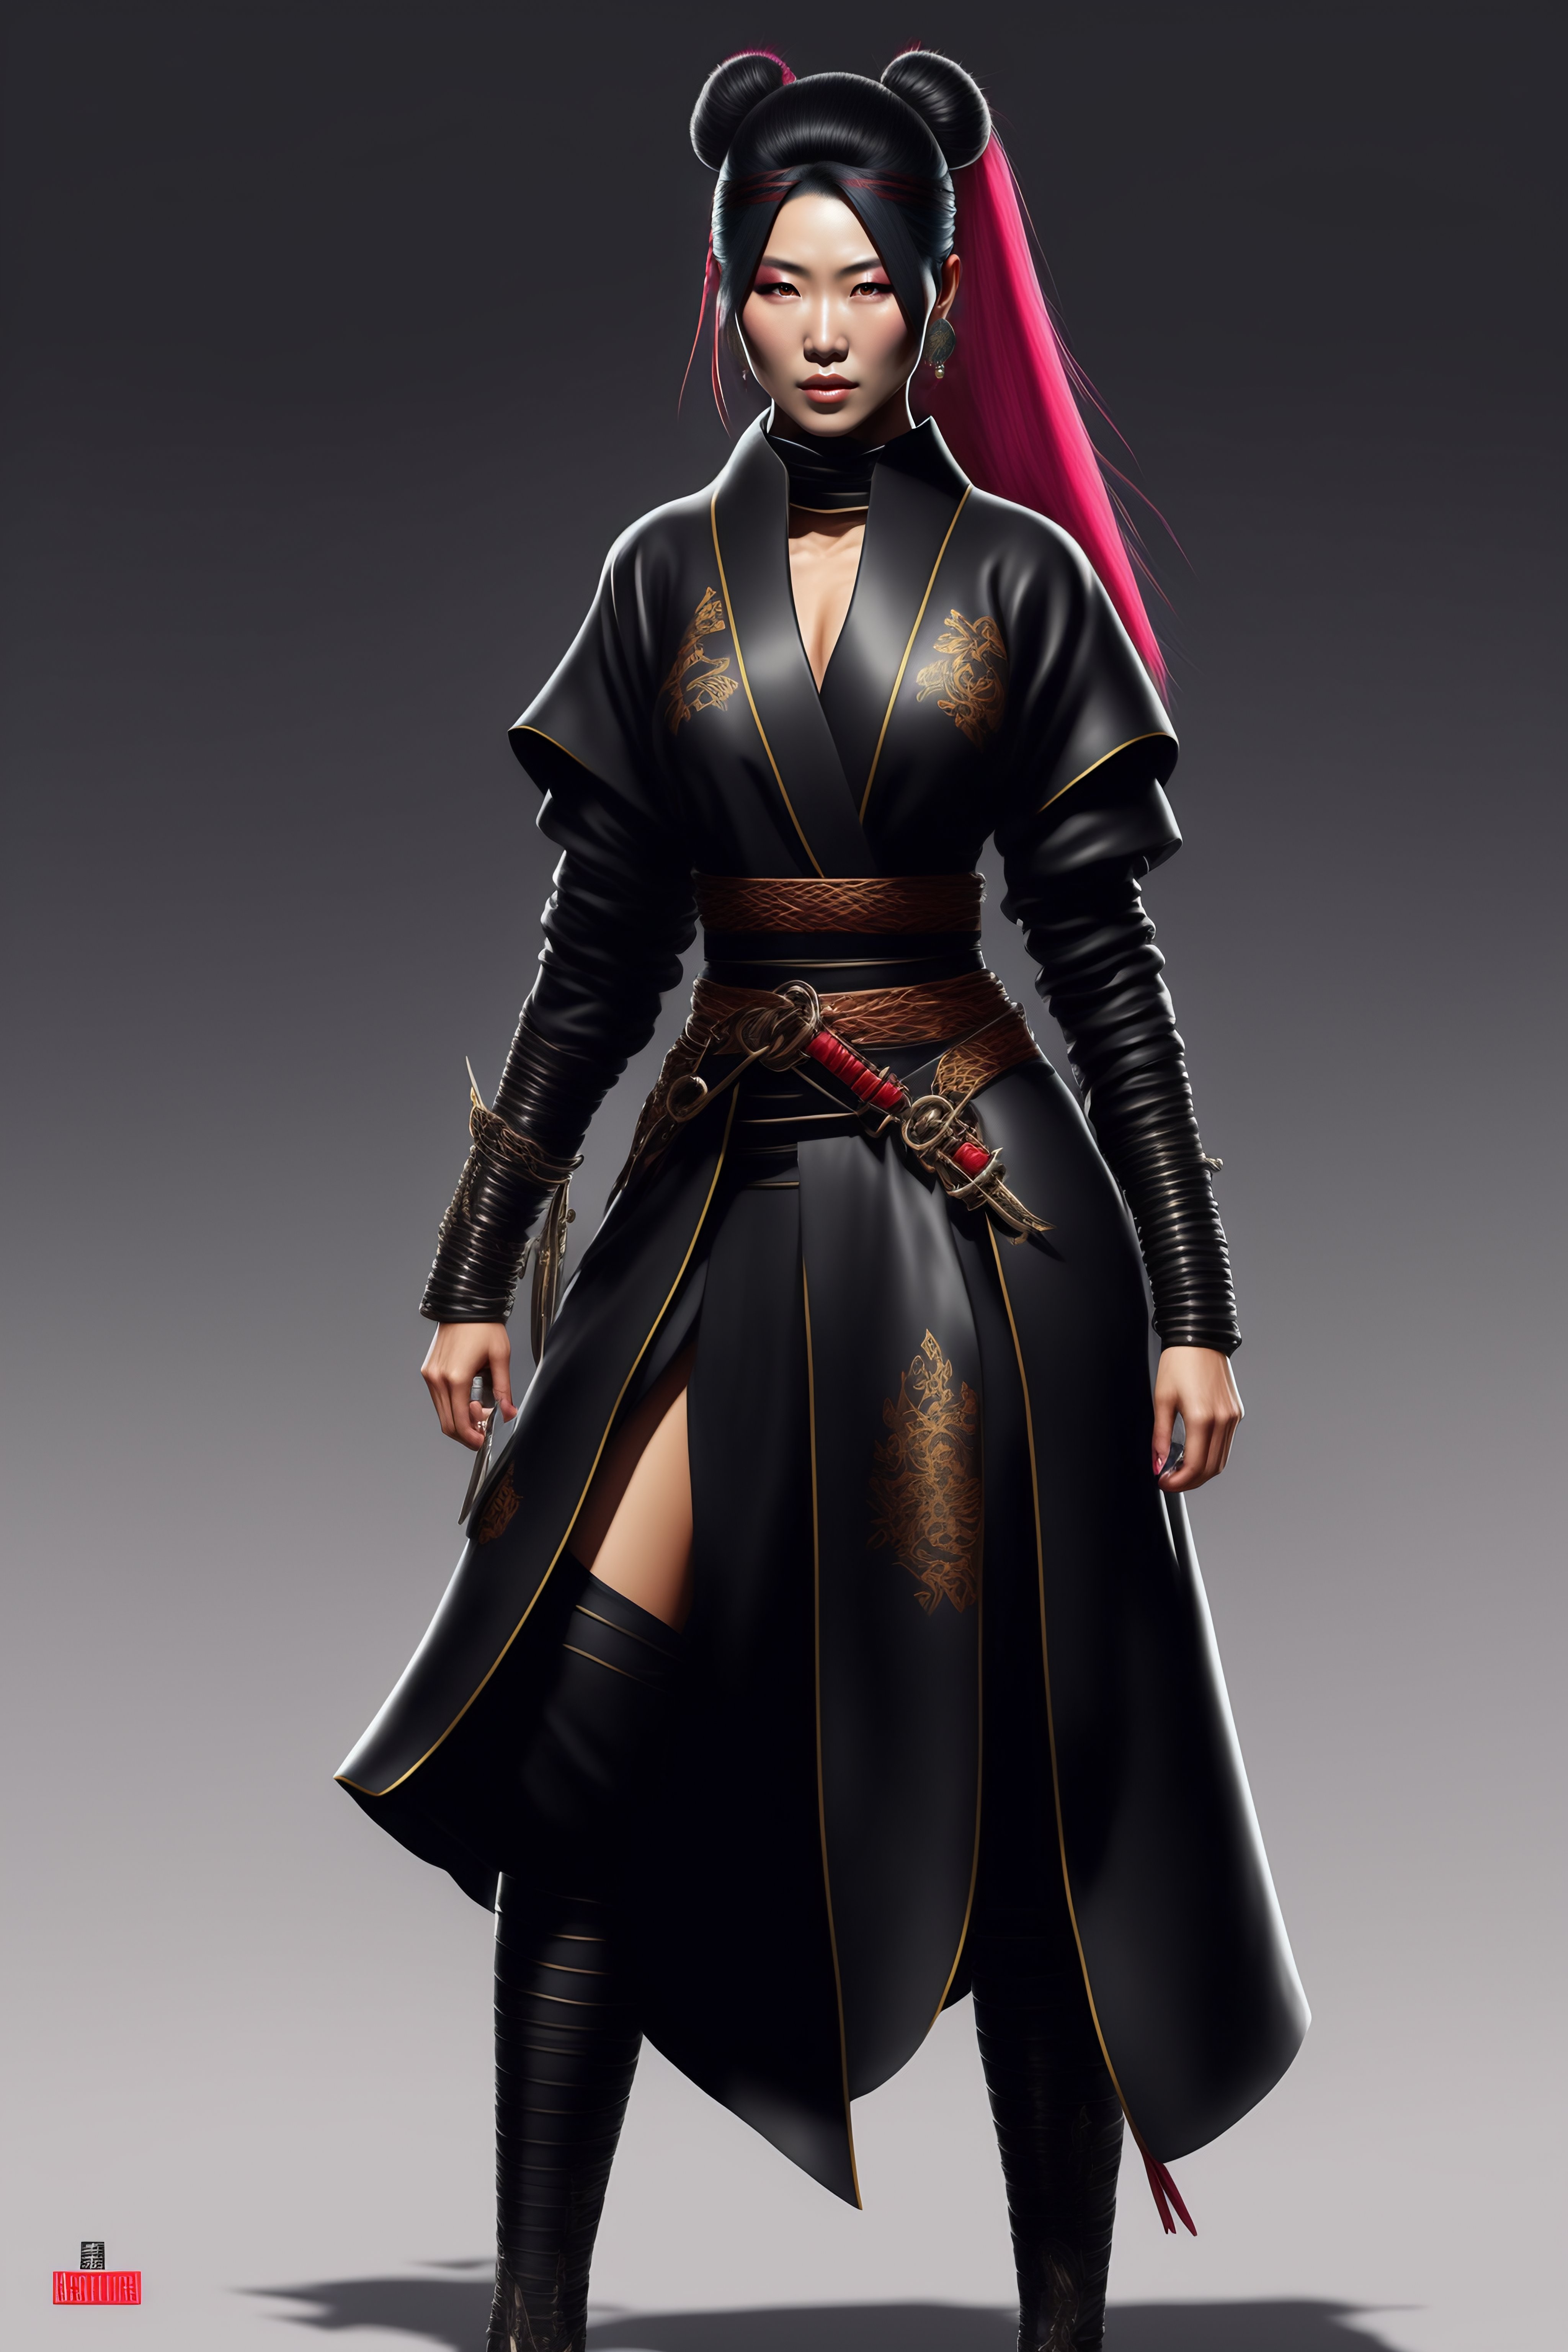 Lexica Concept Art Of A Japanese Ninja Woman Street Style Fashion Clothing With High Detail